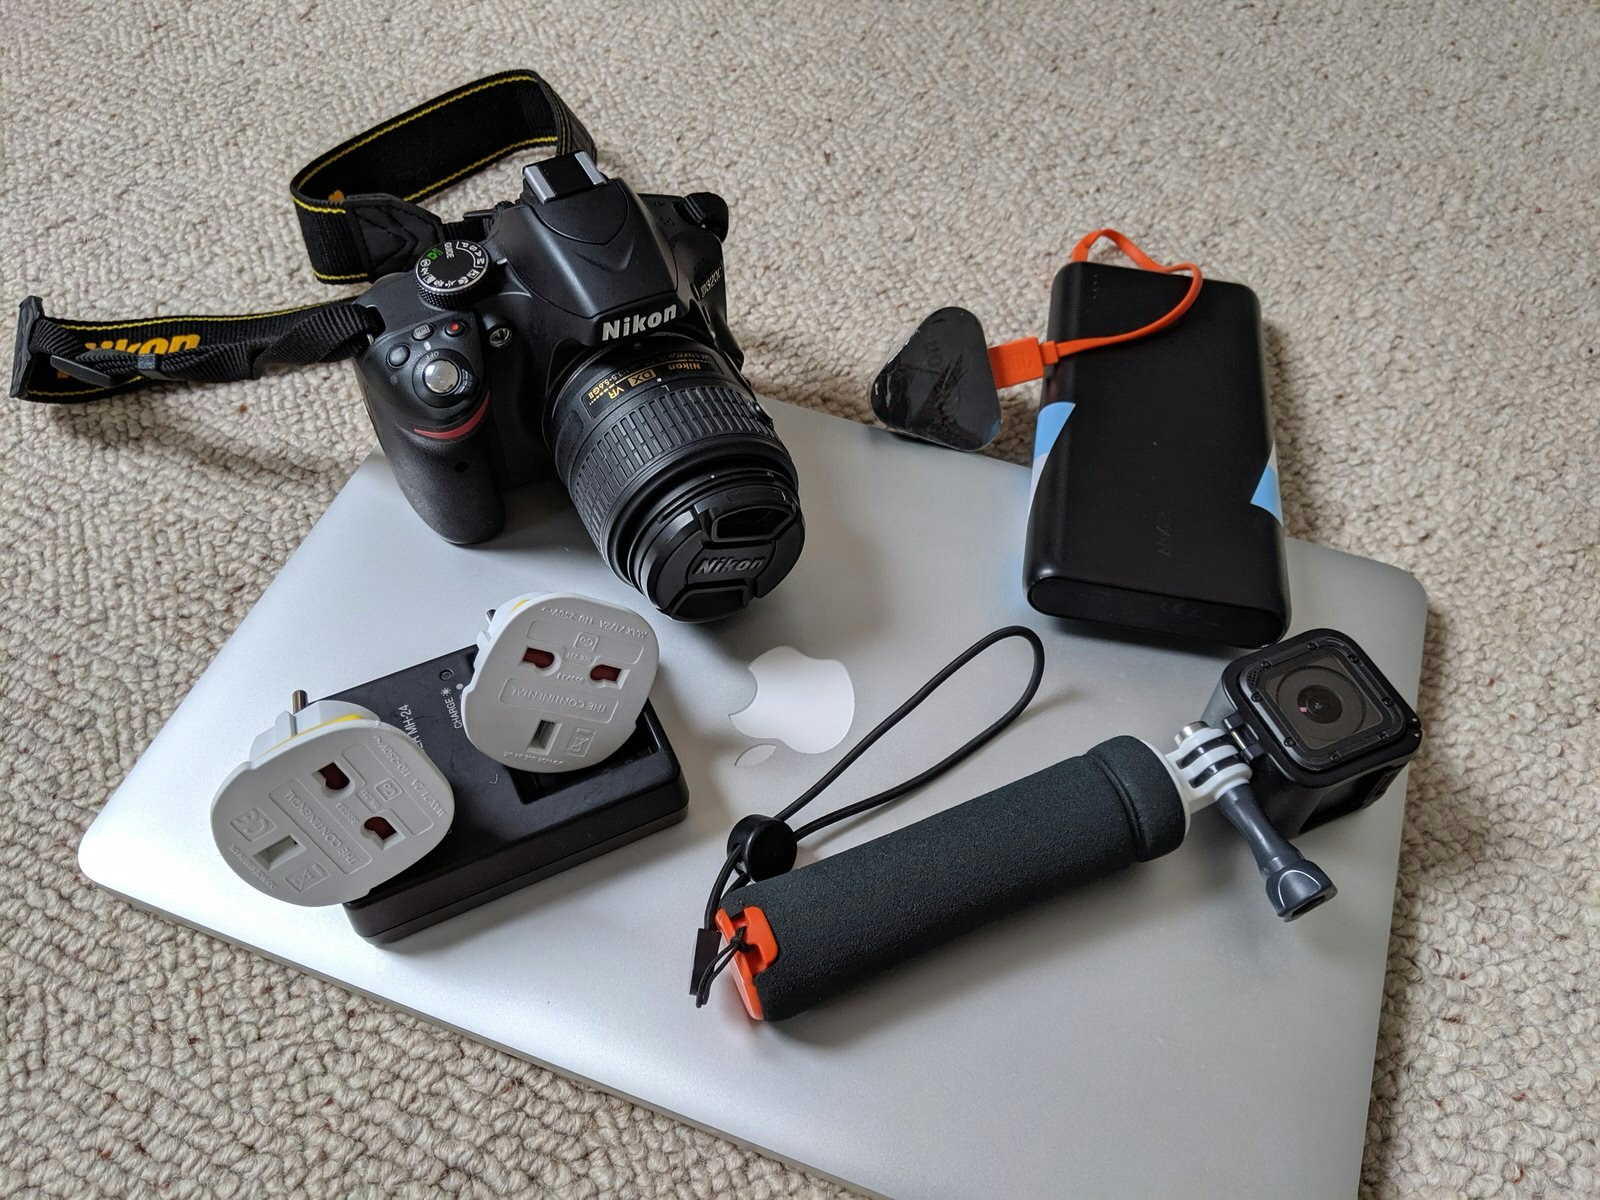 A flat lay of a laptop, plug adaptors, camera and battery pack